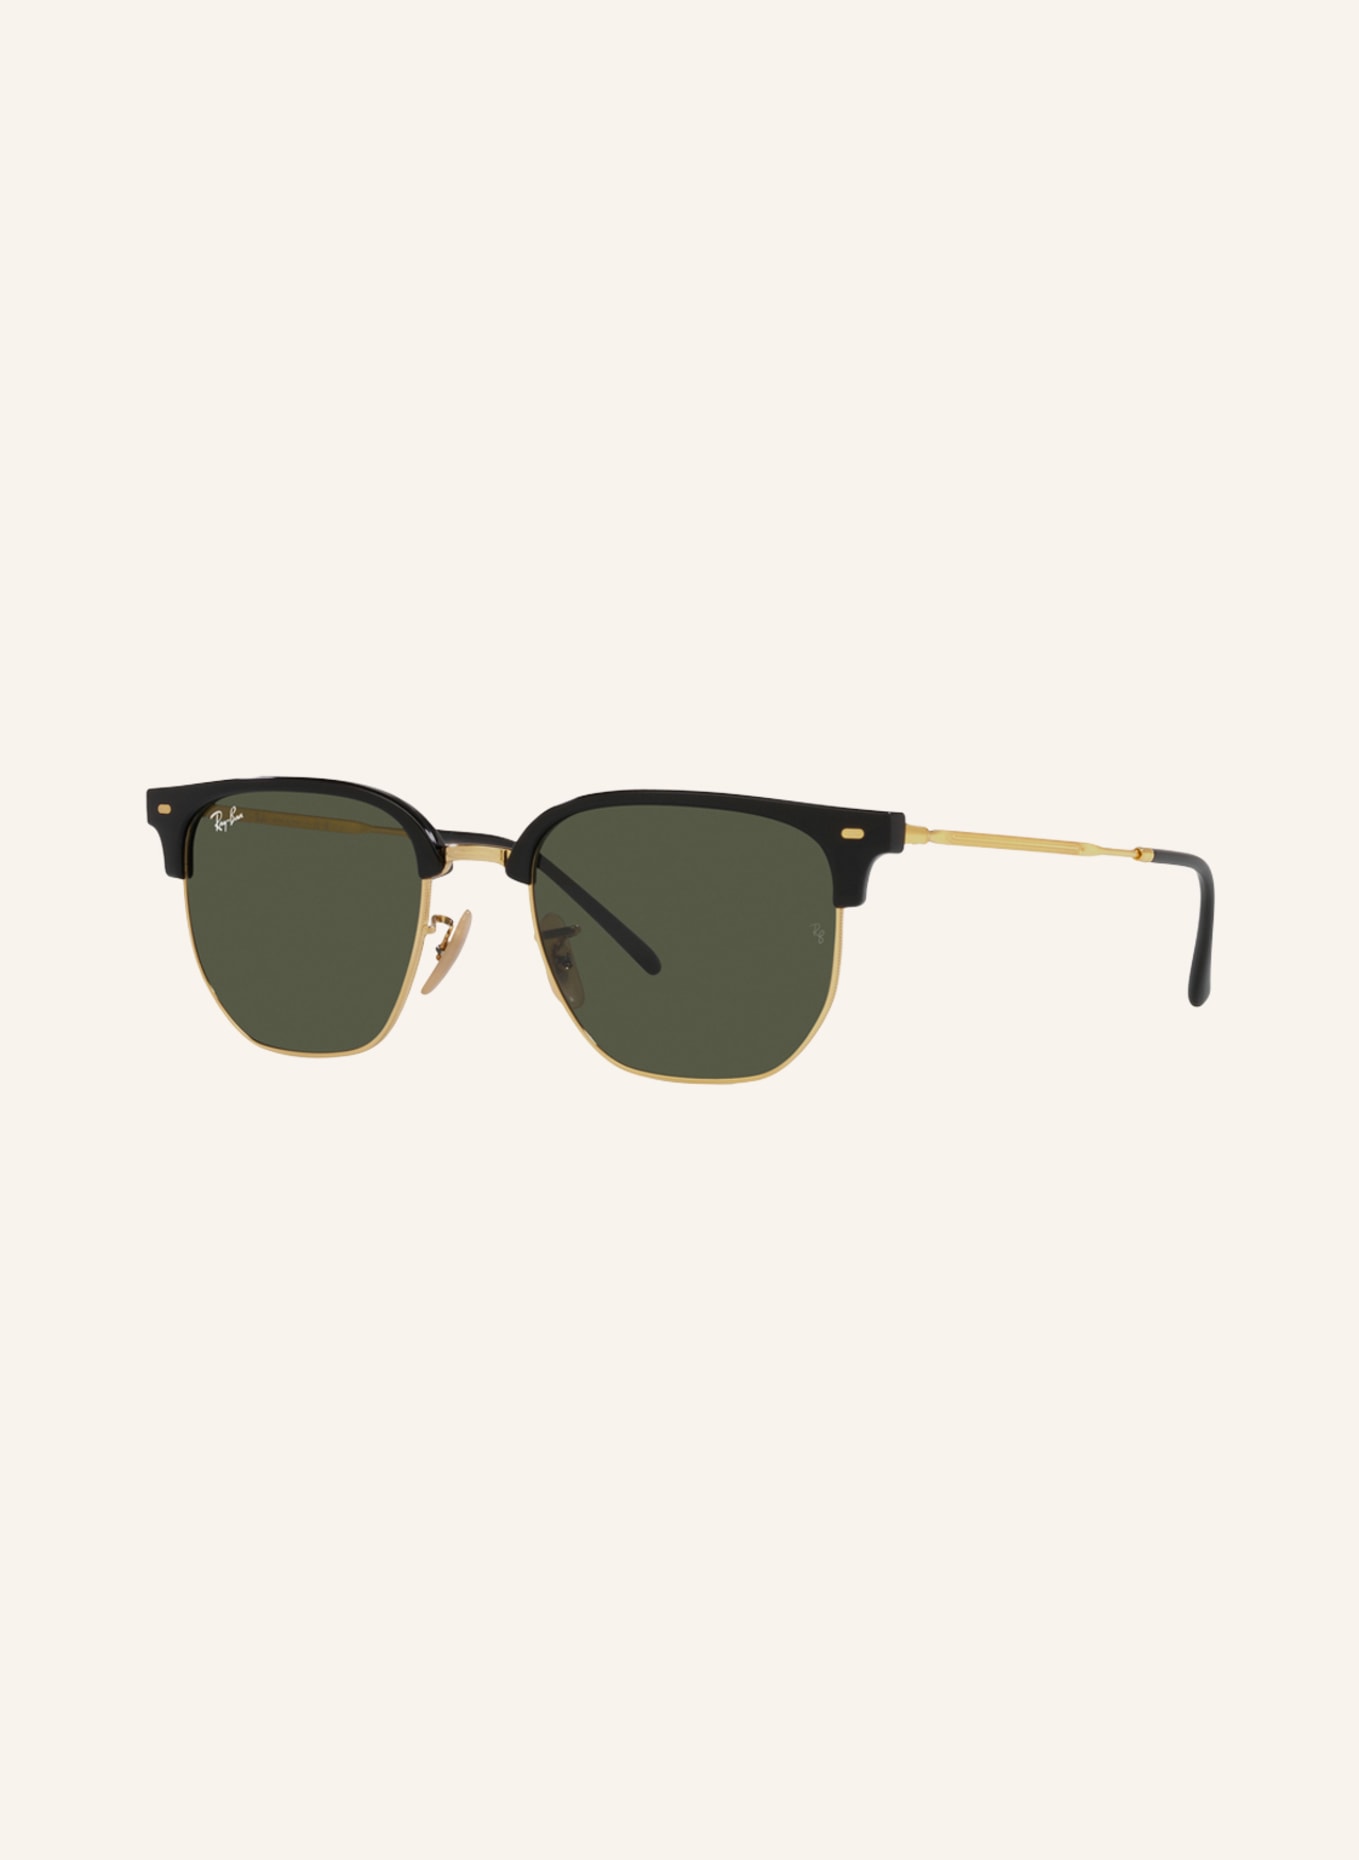 Ray-Ban Sunglasses RB4416, Color: 601/31 - GOLD/ BLACK/ GREEN (Image 1)